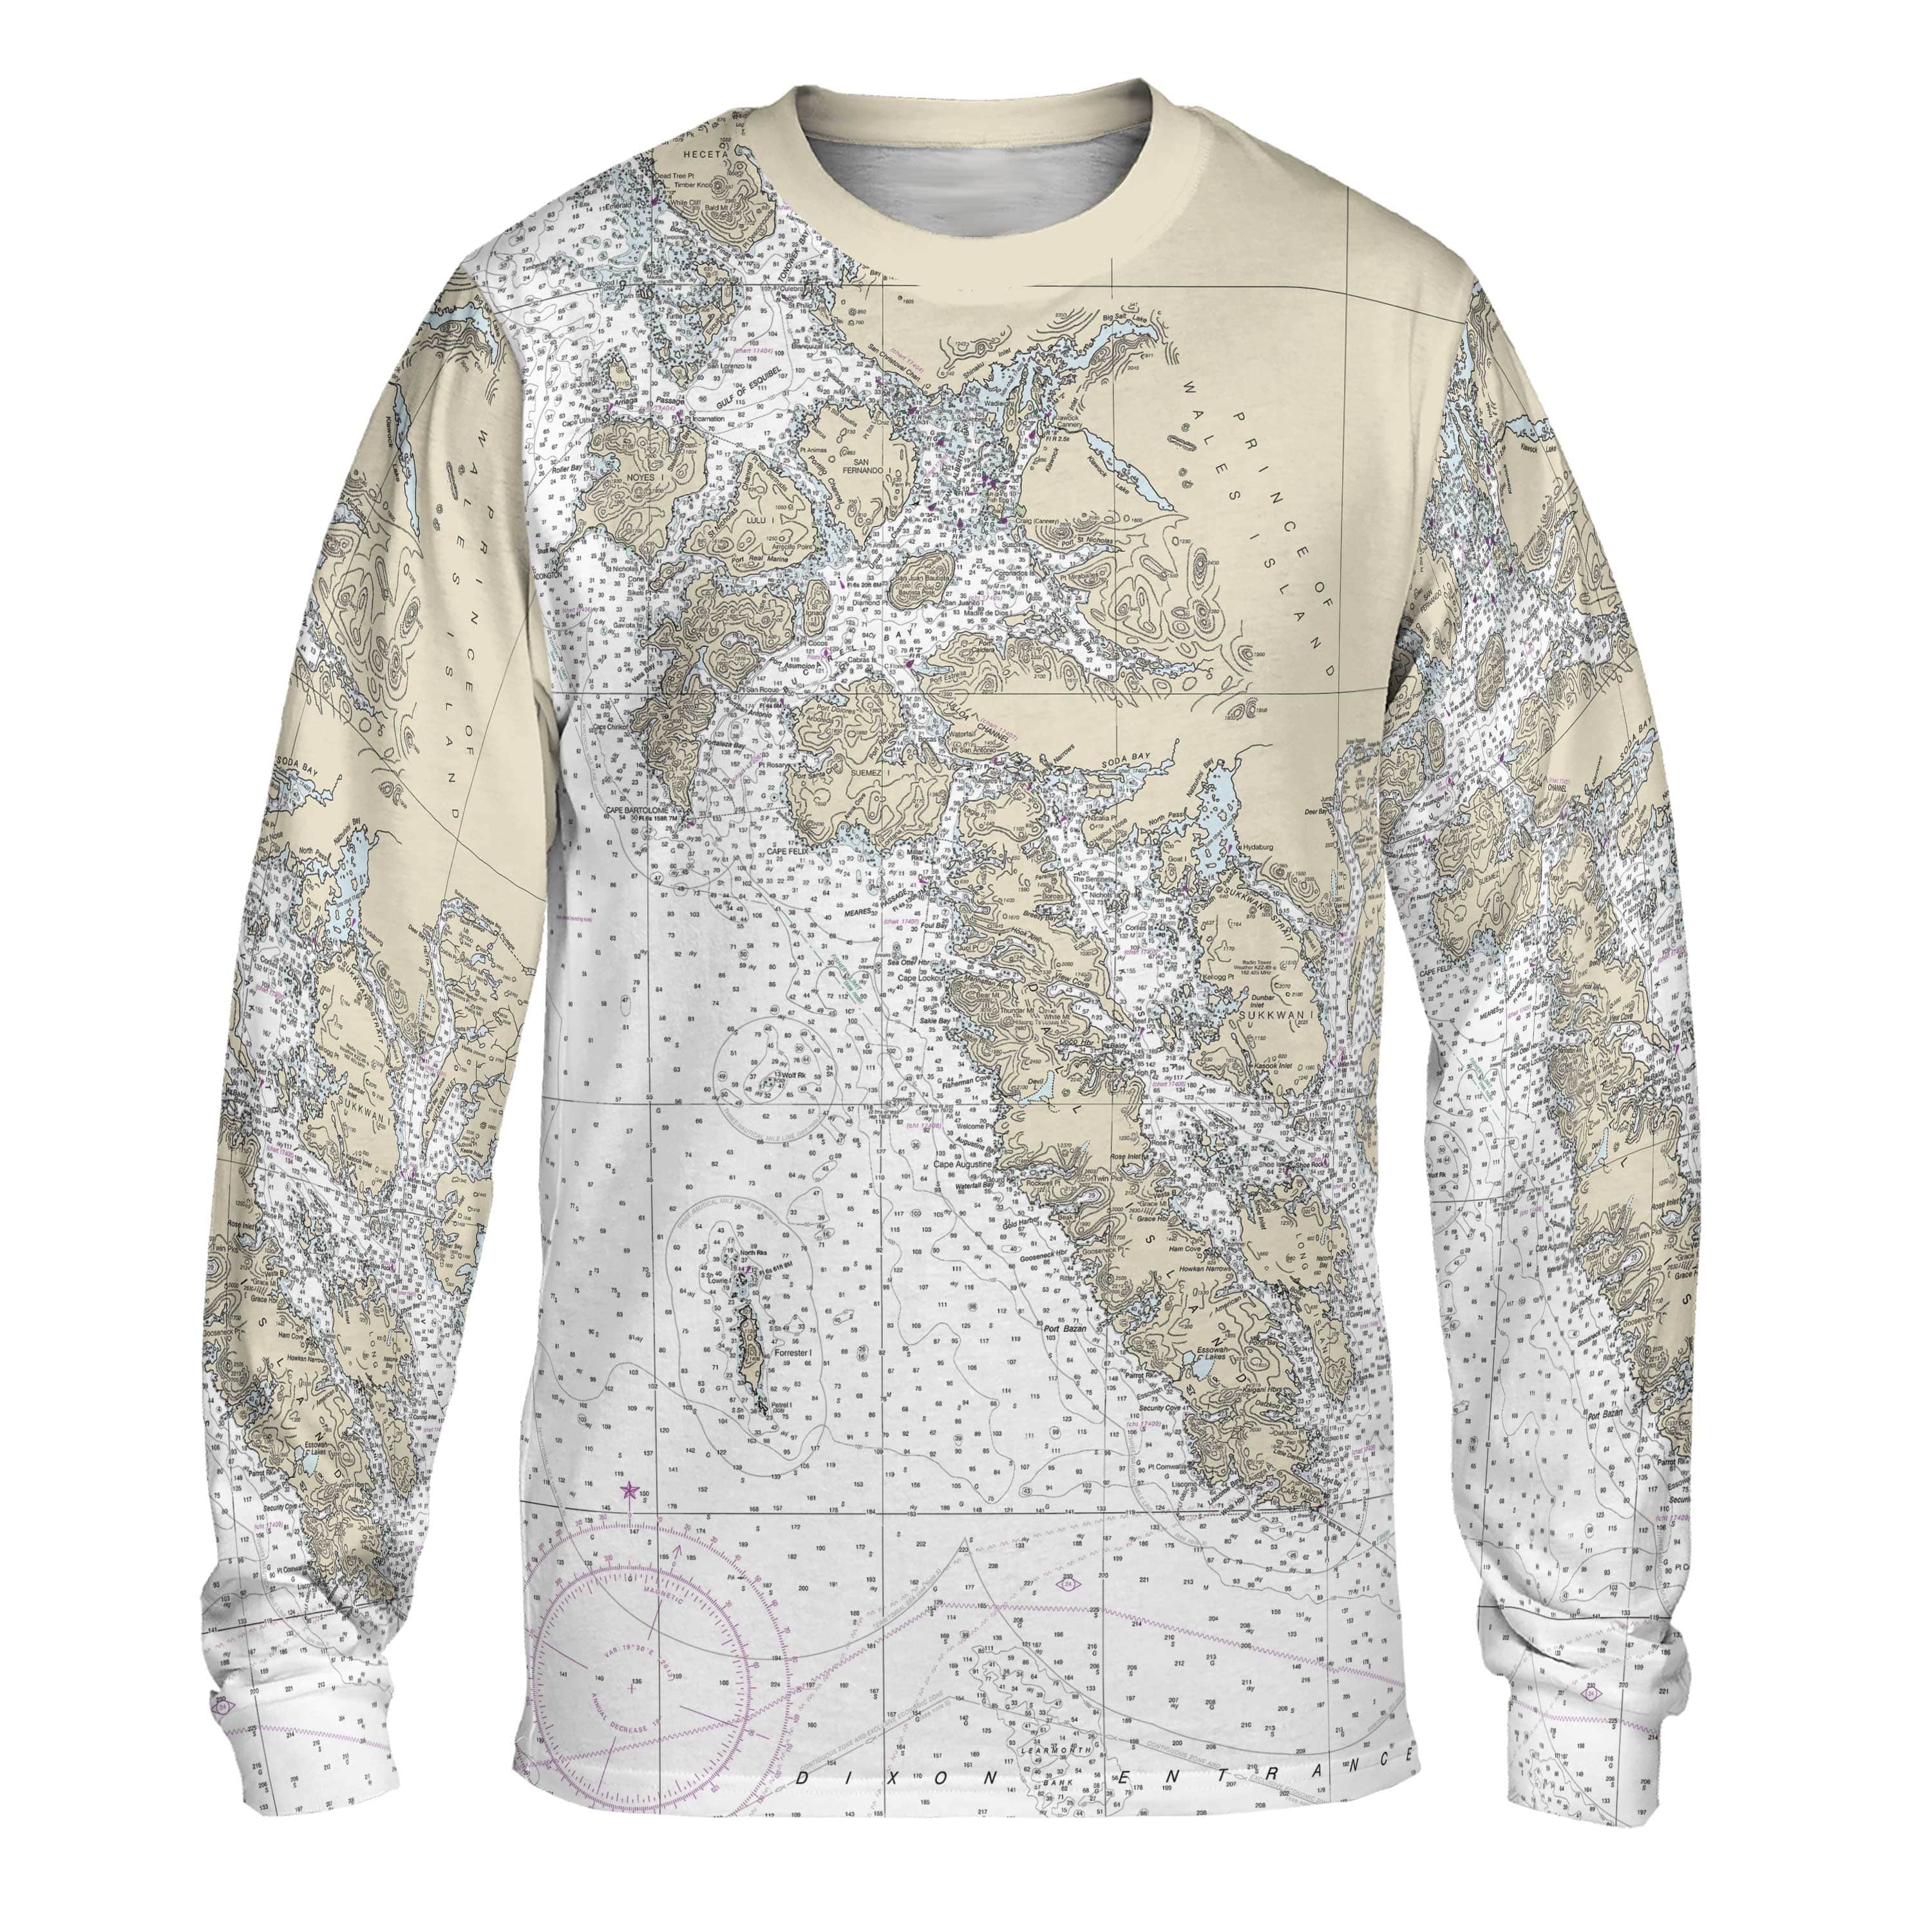 The Gulf of Esquibel to Dixon Entrance Long Sleeve Tee